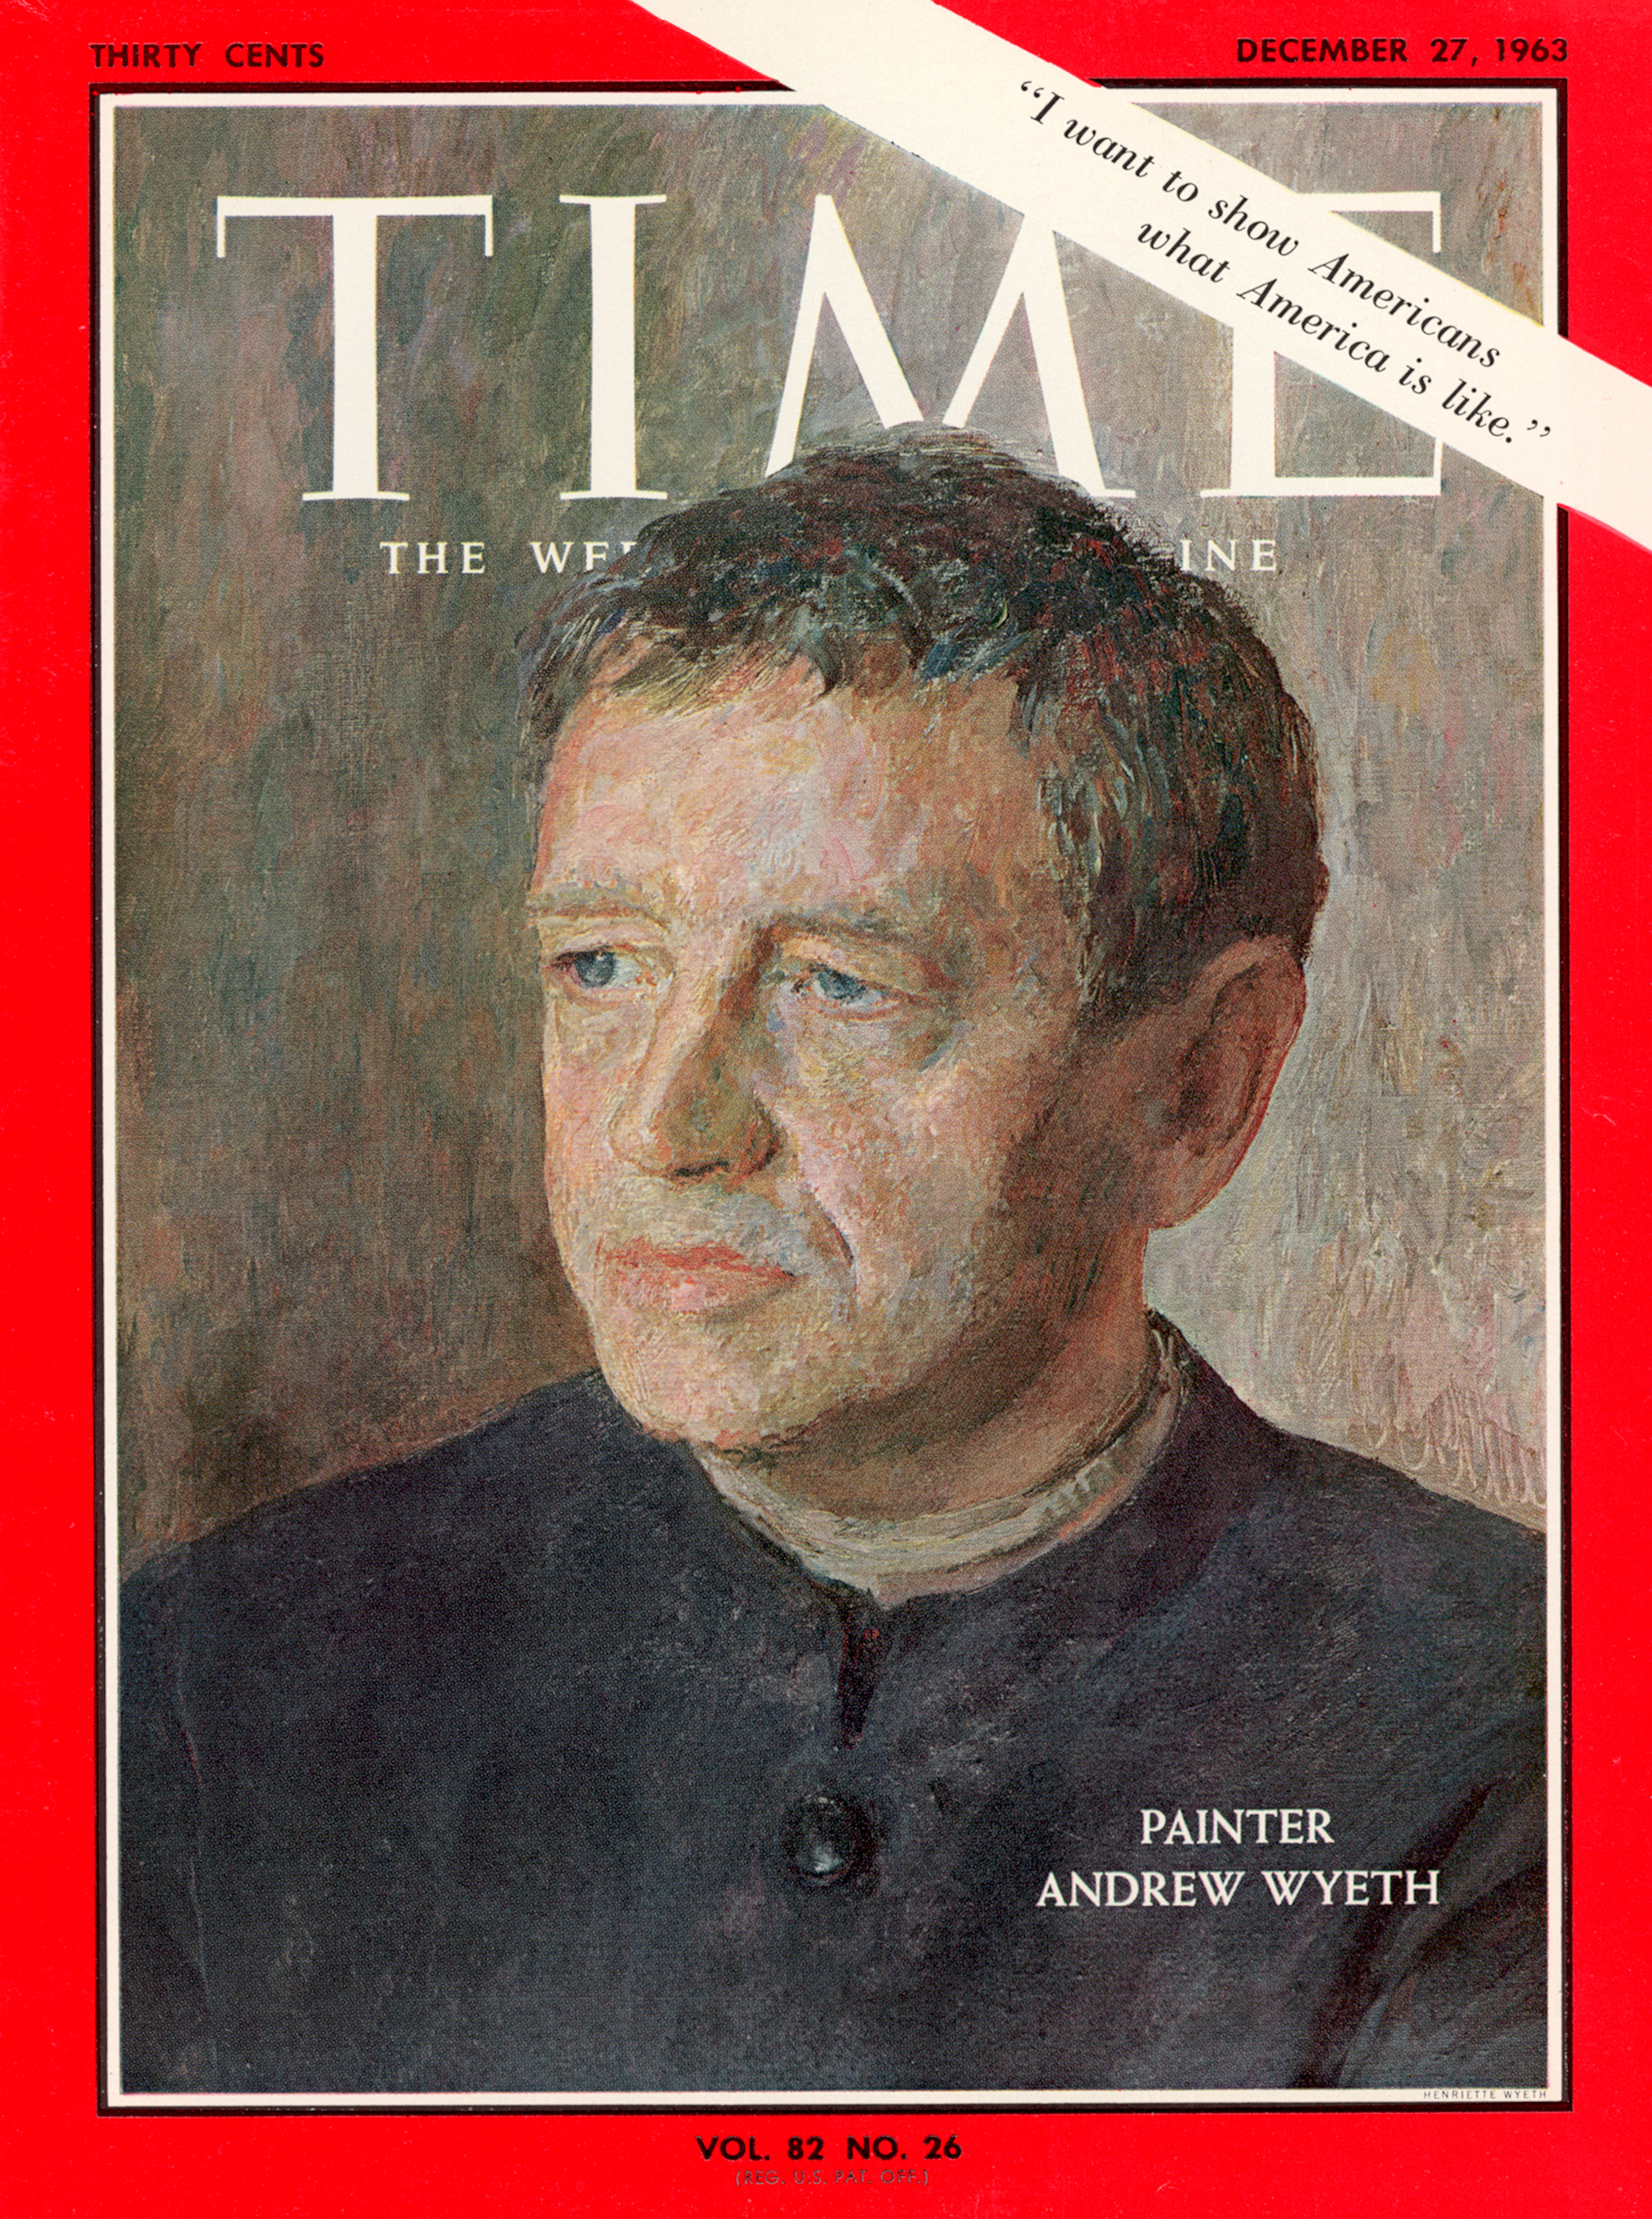 Dec. 27, 1963 TIME magazine cover with painting of artist Andrew Wyeth by his sister Henriette Hurd.